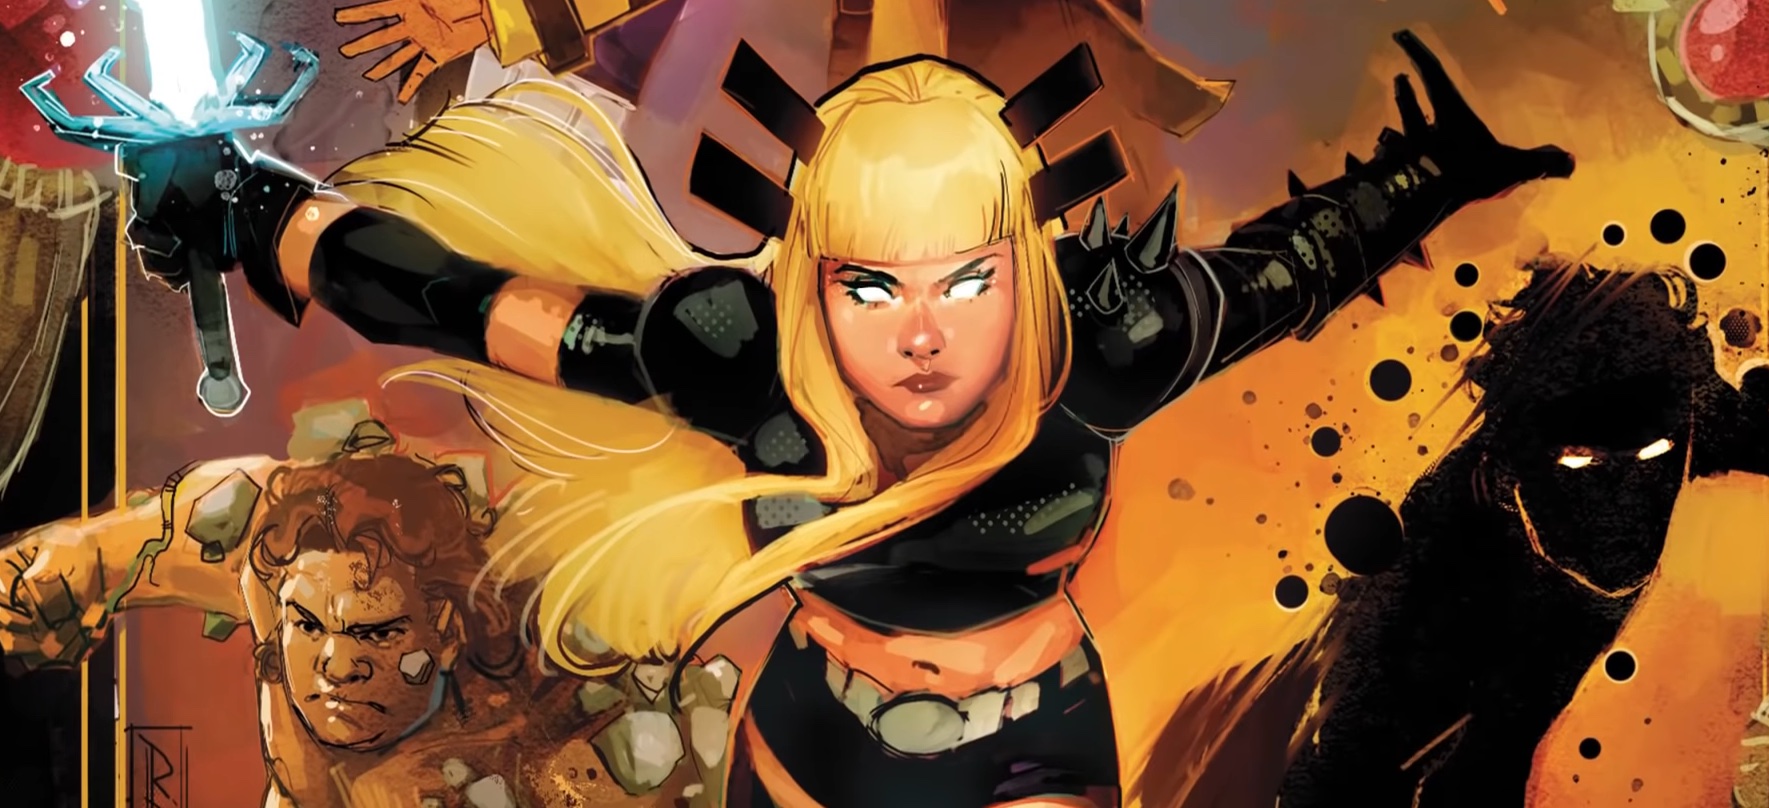 Disney's 'The New Mutants': Know the superpowers of the five